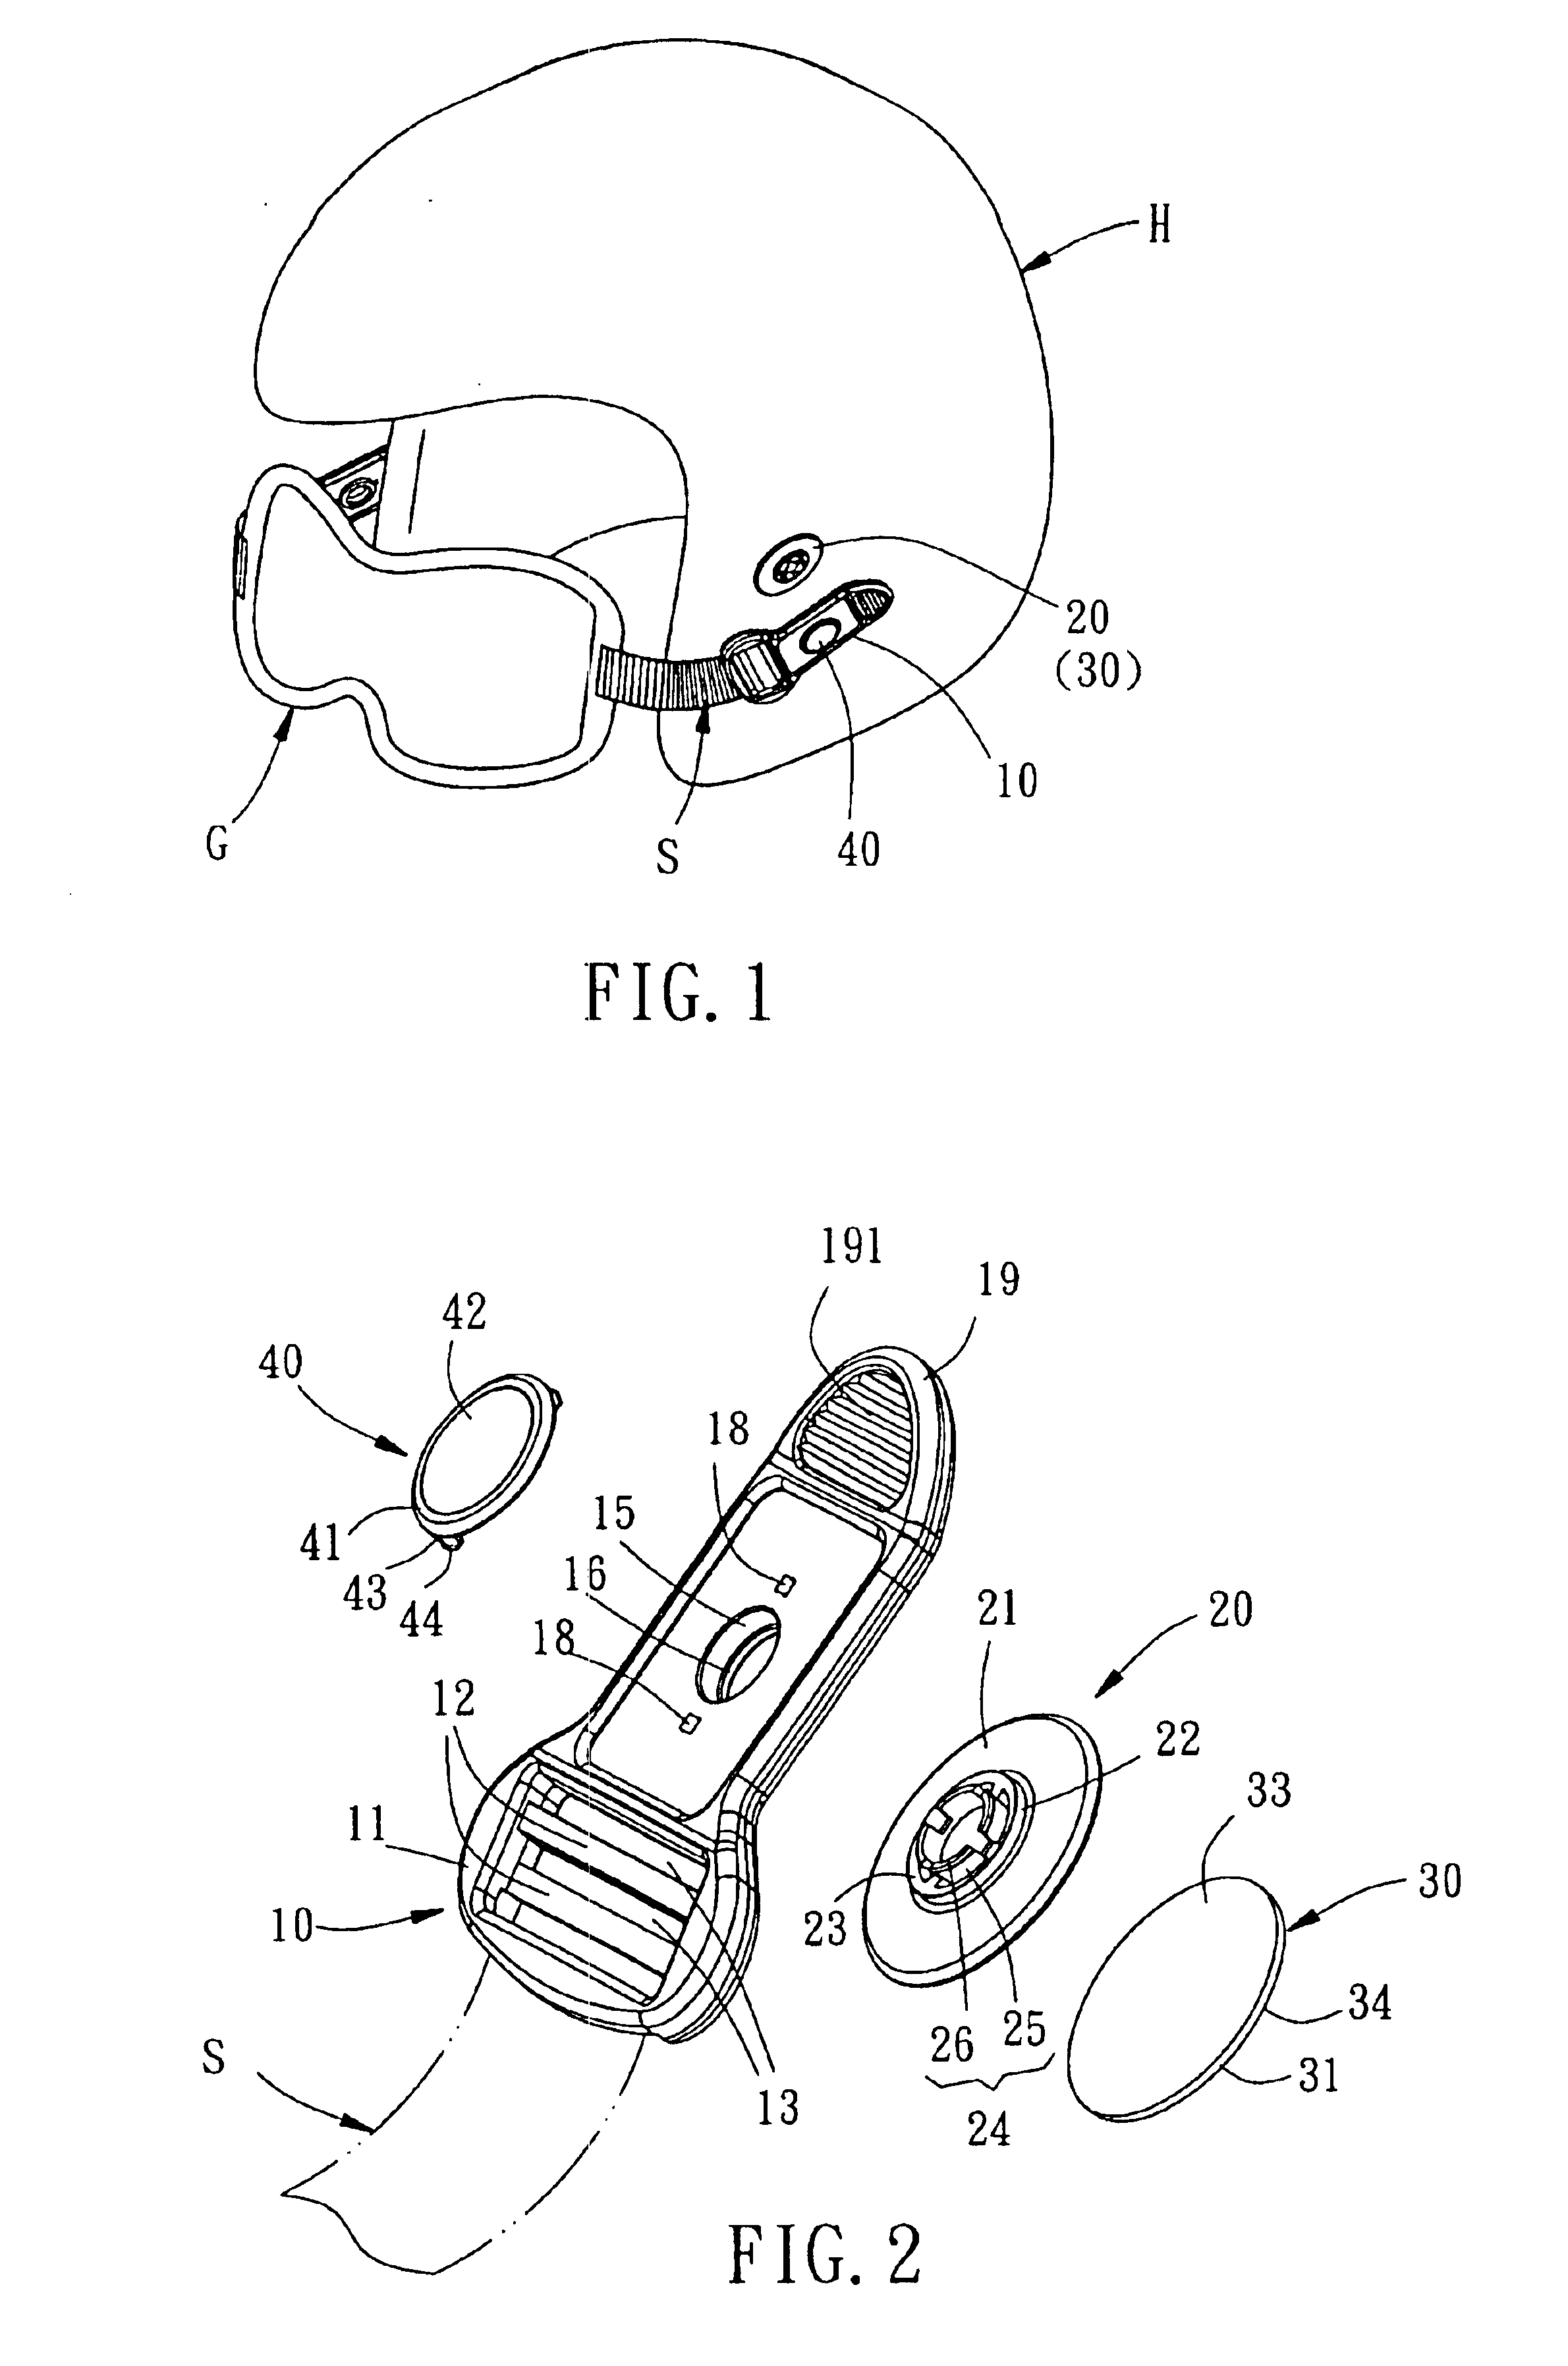 Buckle assembly for mounting goggle on helmet